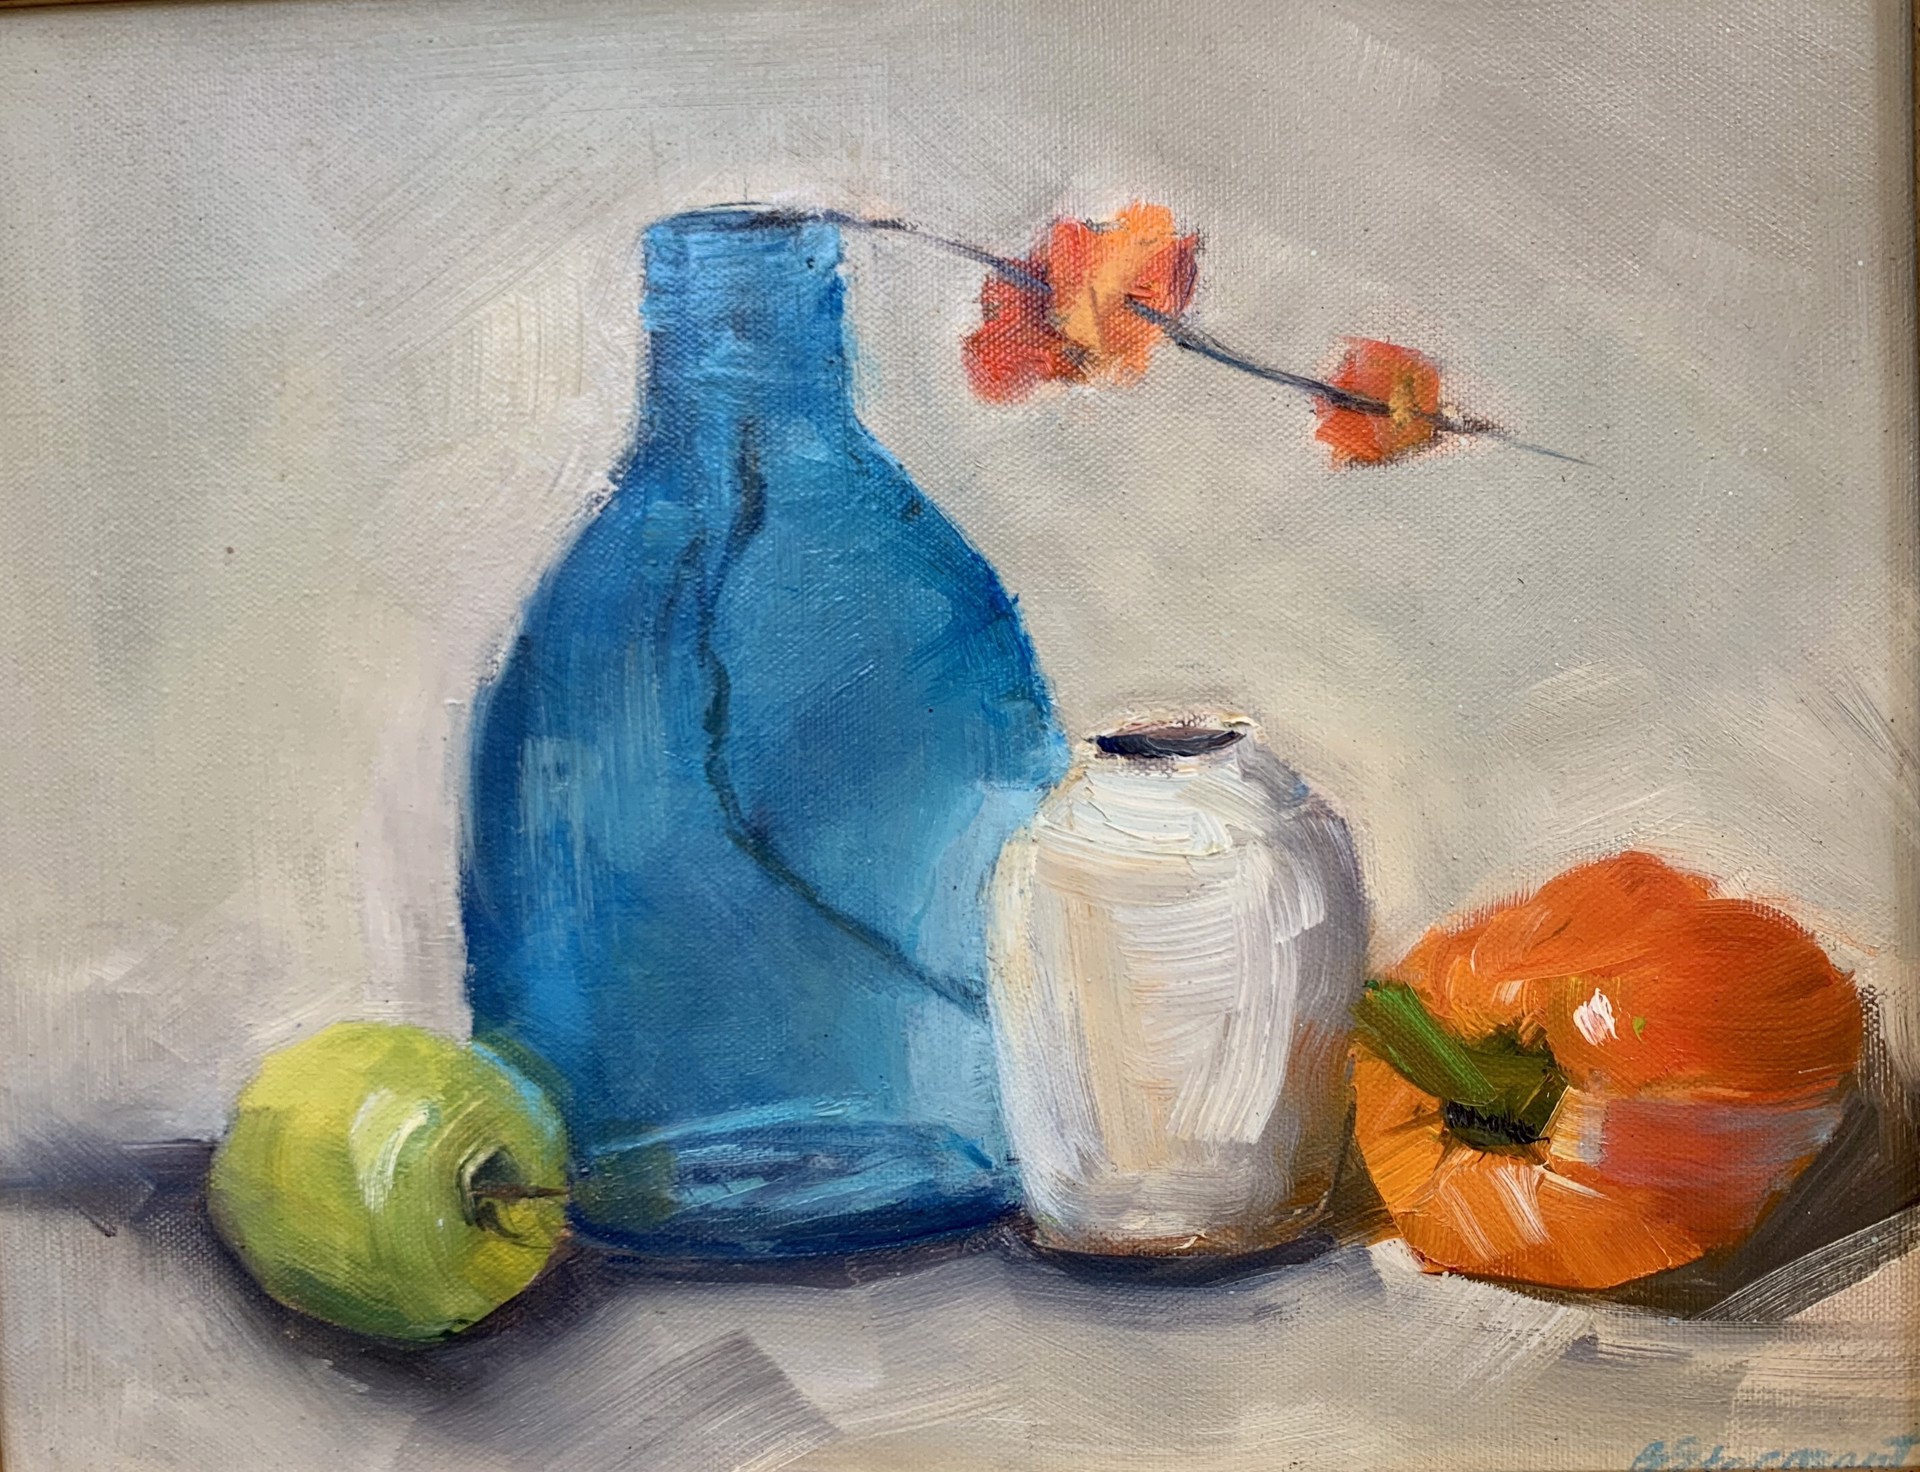 Orange and Pepper by Beth Stormont